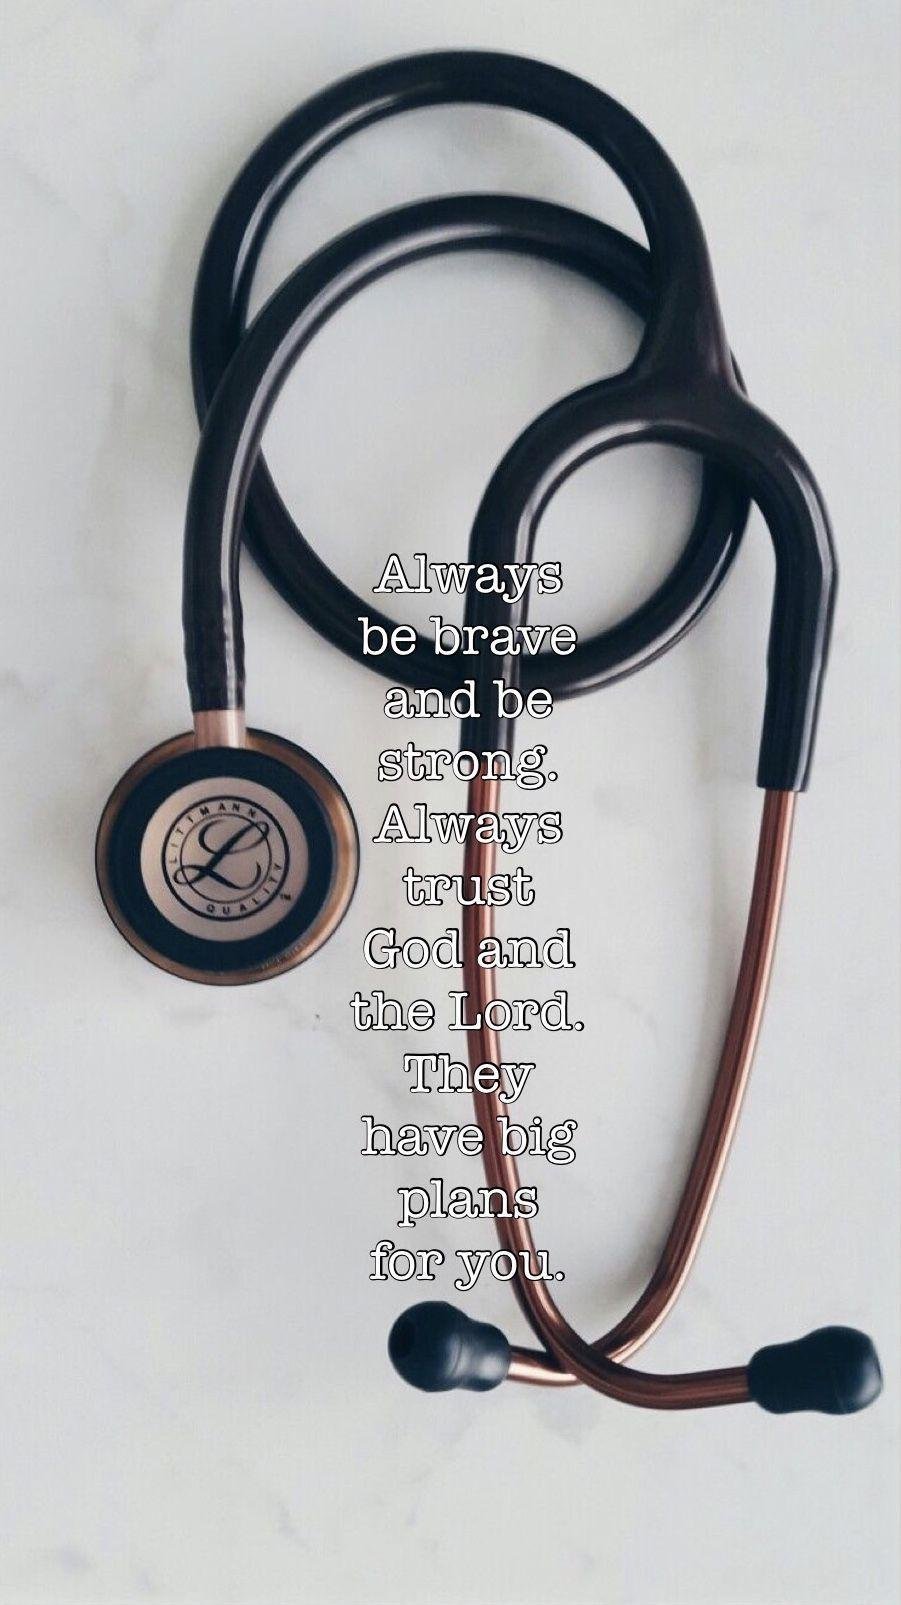 78,600 Stethoscope On Black Background Images, Stock Photos & Vectors |  Shutterstock